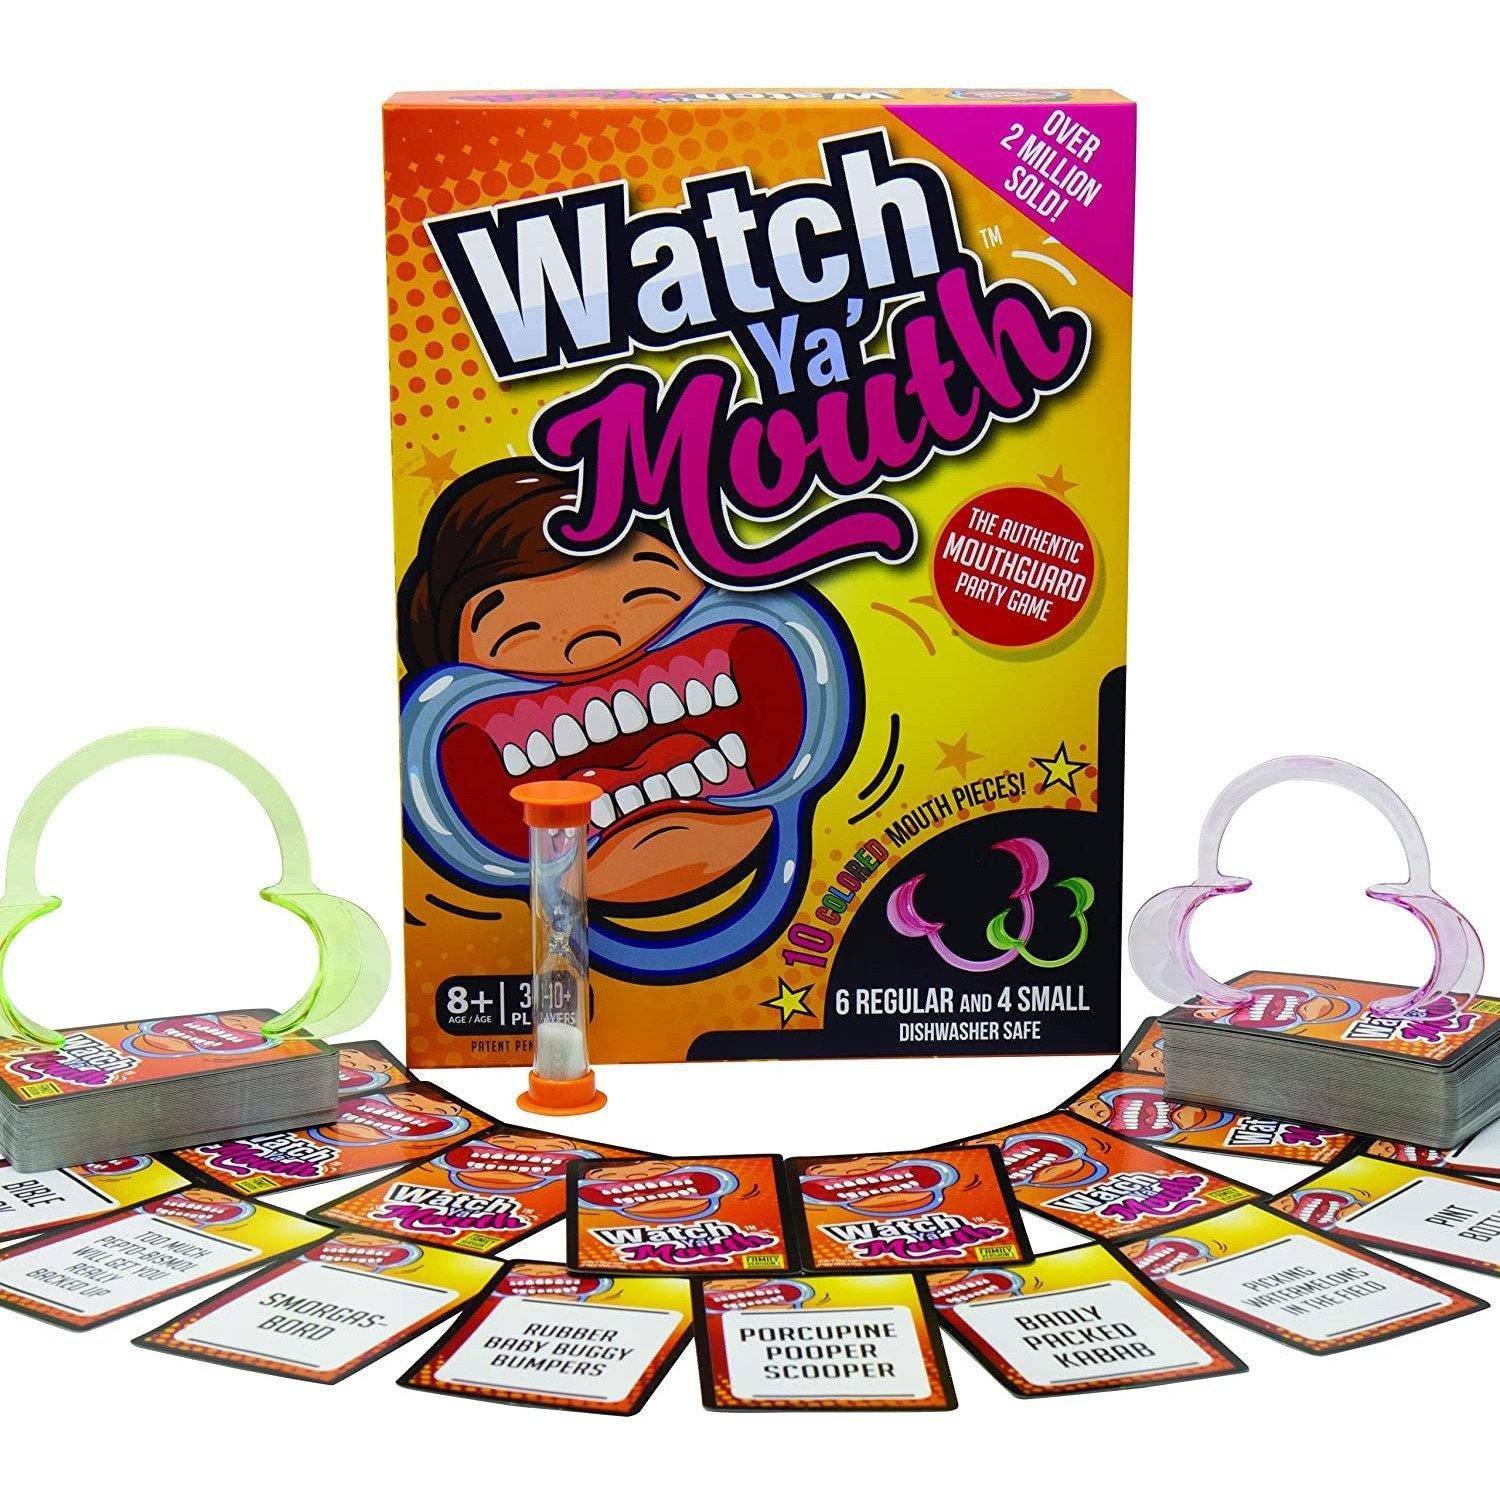 Watch Ya' Mouth Family Edition - The Authentic, Hilarious, Mouthguard Party Game - BumbleToys - 8-13 Years, Card & Board Games, Puzzle & Board & Card Games, Unisex